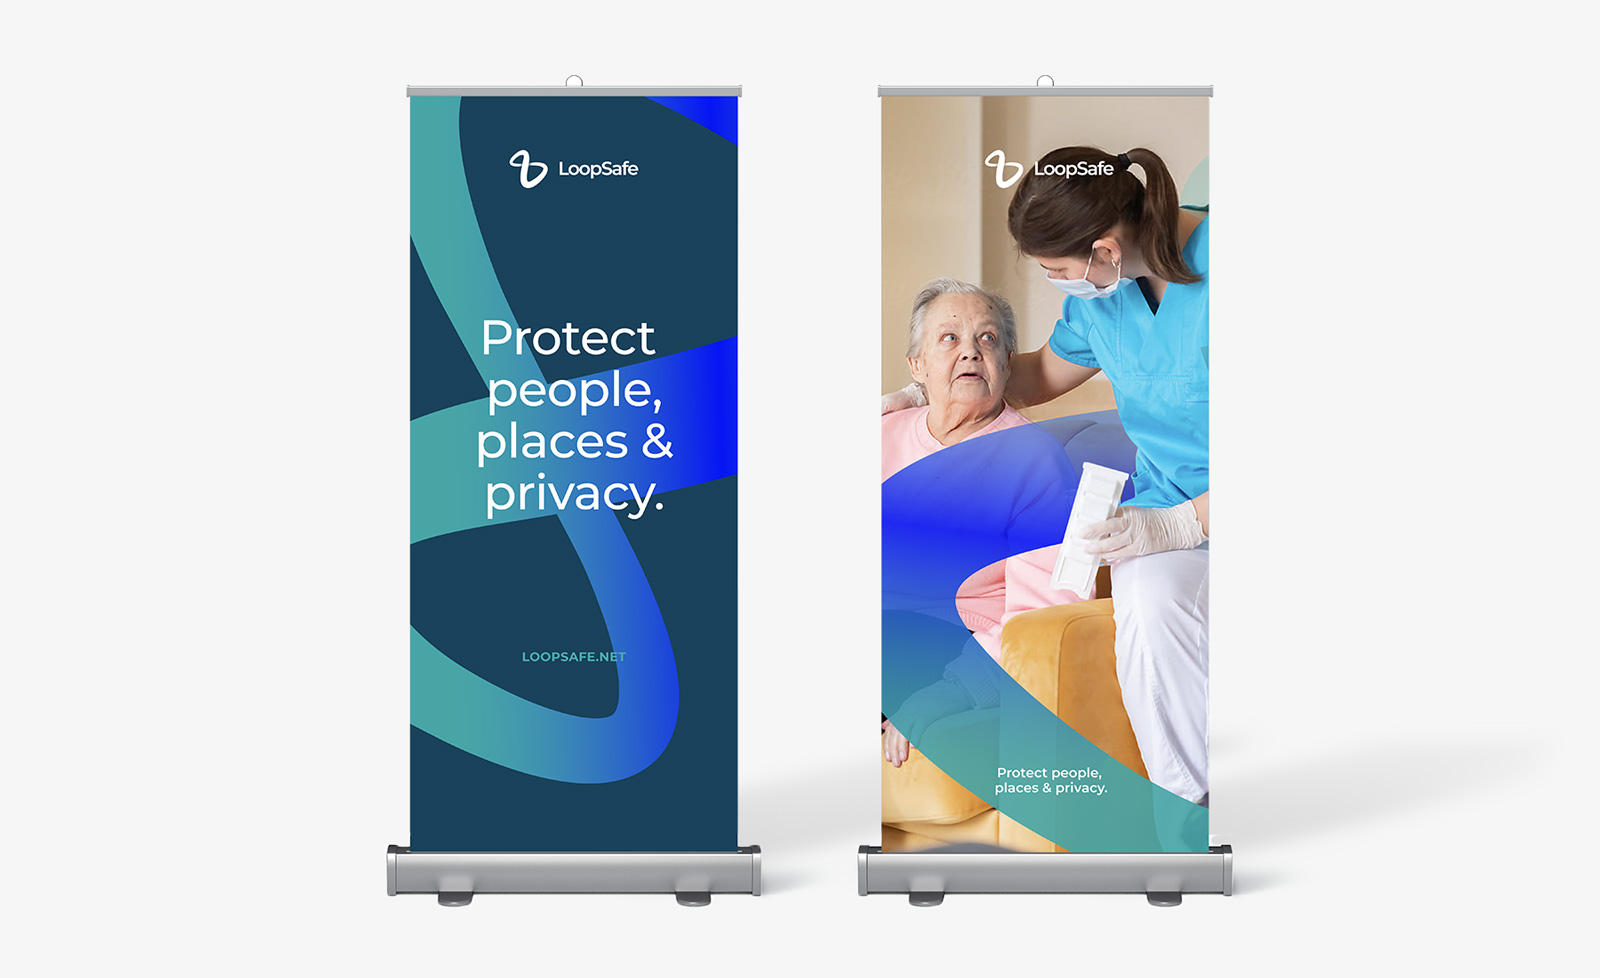 Two pullup banners for LoopSafe marketing purposes